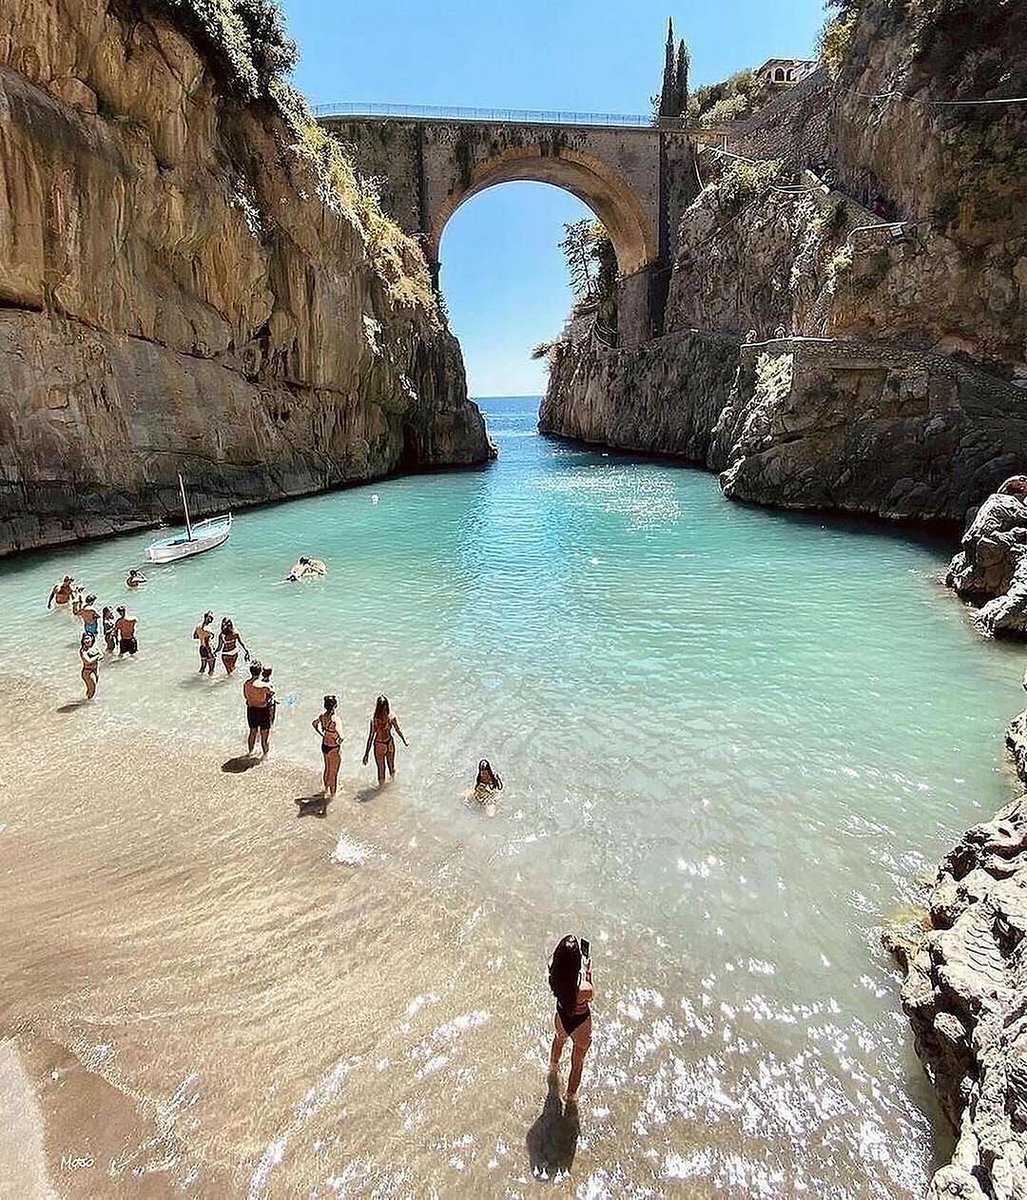 Furore, Italy 🇮🇹

Fiordo di Furore, a hidden gem nestled along the Amalfi Coast in Italy, is a breathtaking natural wonder. At the heart of it lies a stunning arch that spans the width of the fjord, and its emerald waters.

Show me a picture of a more beautiful beach